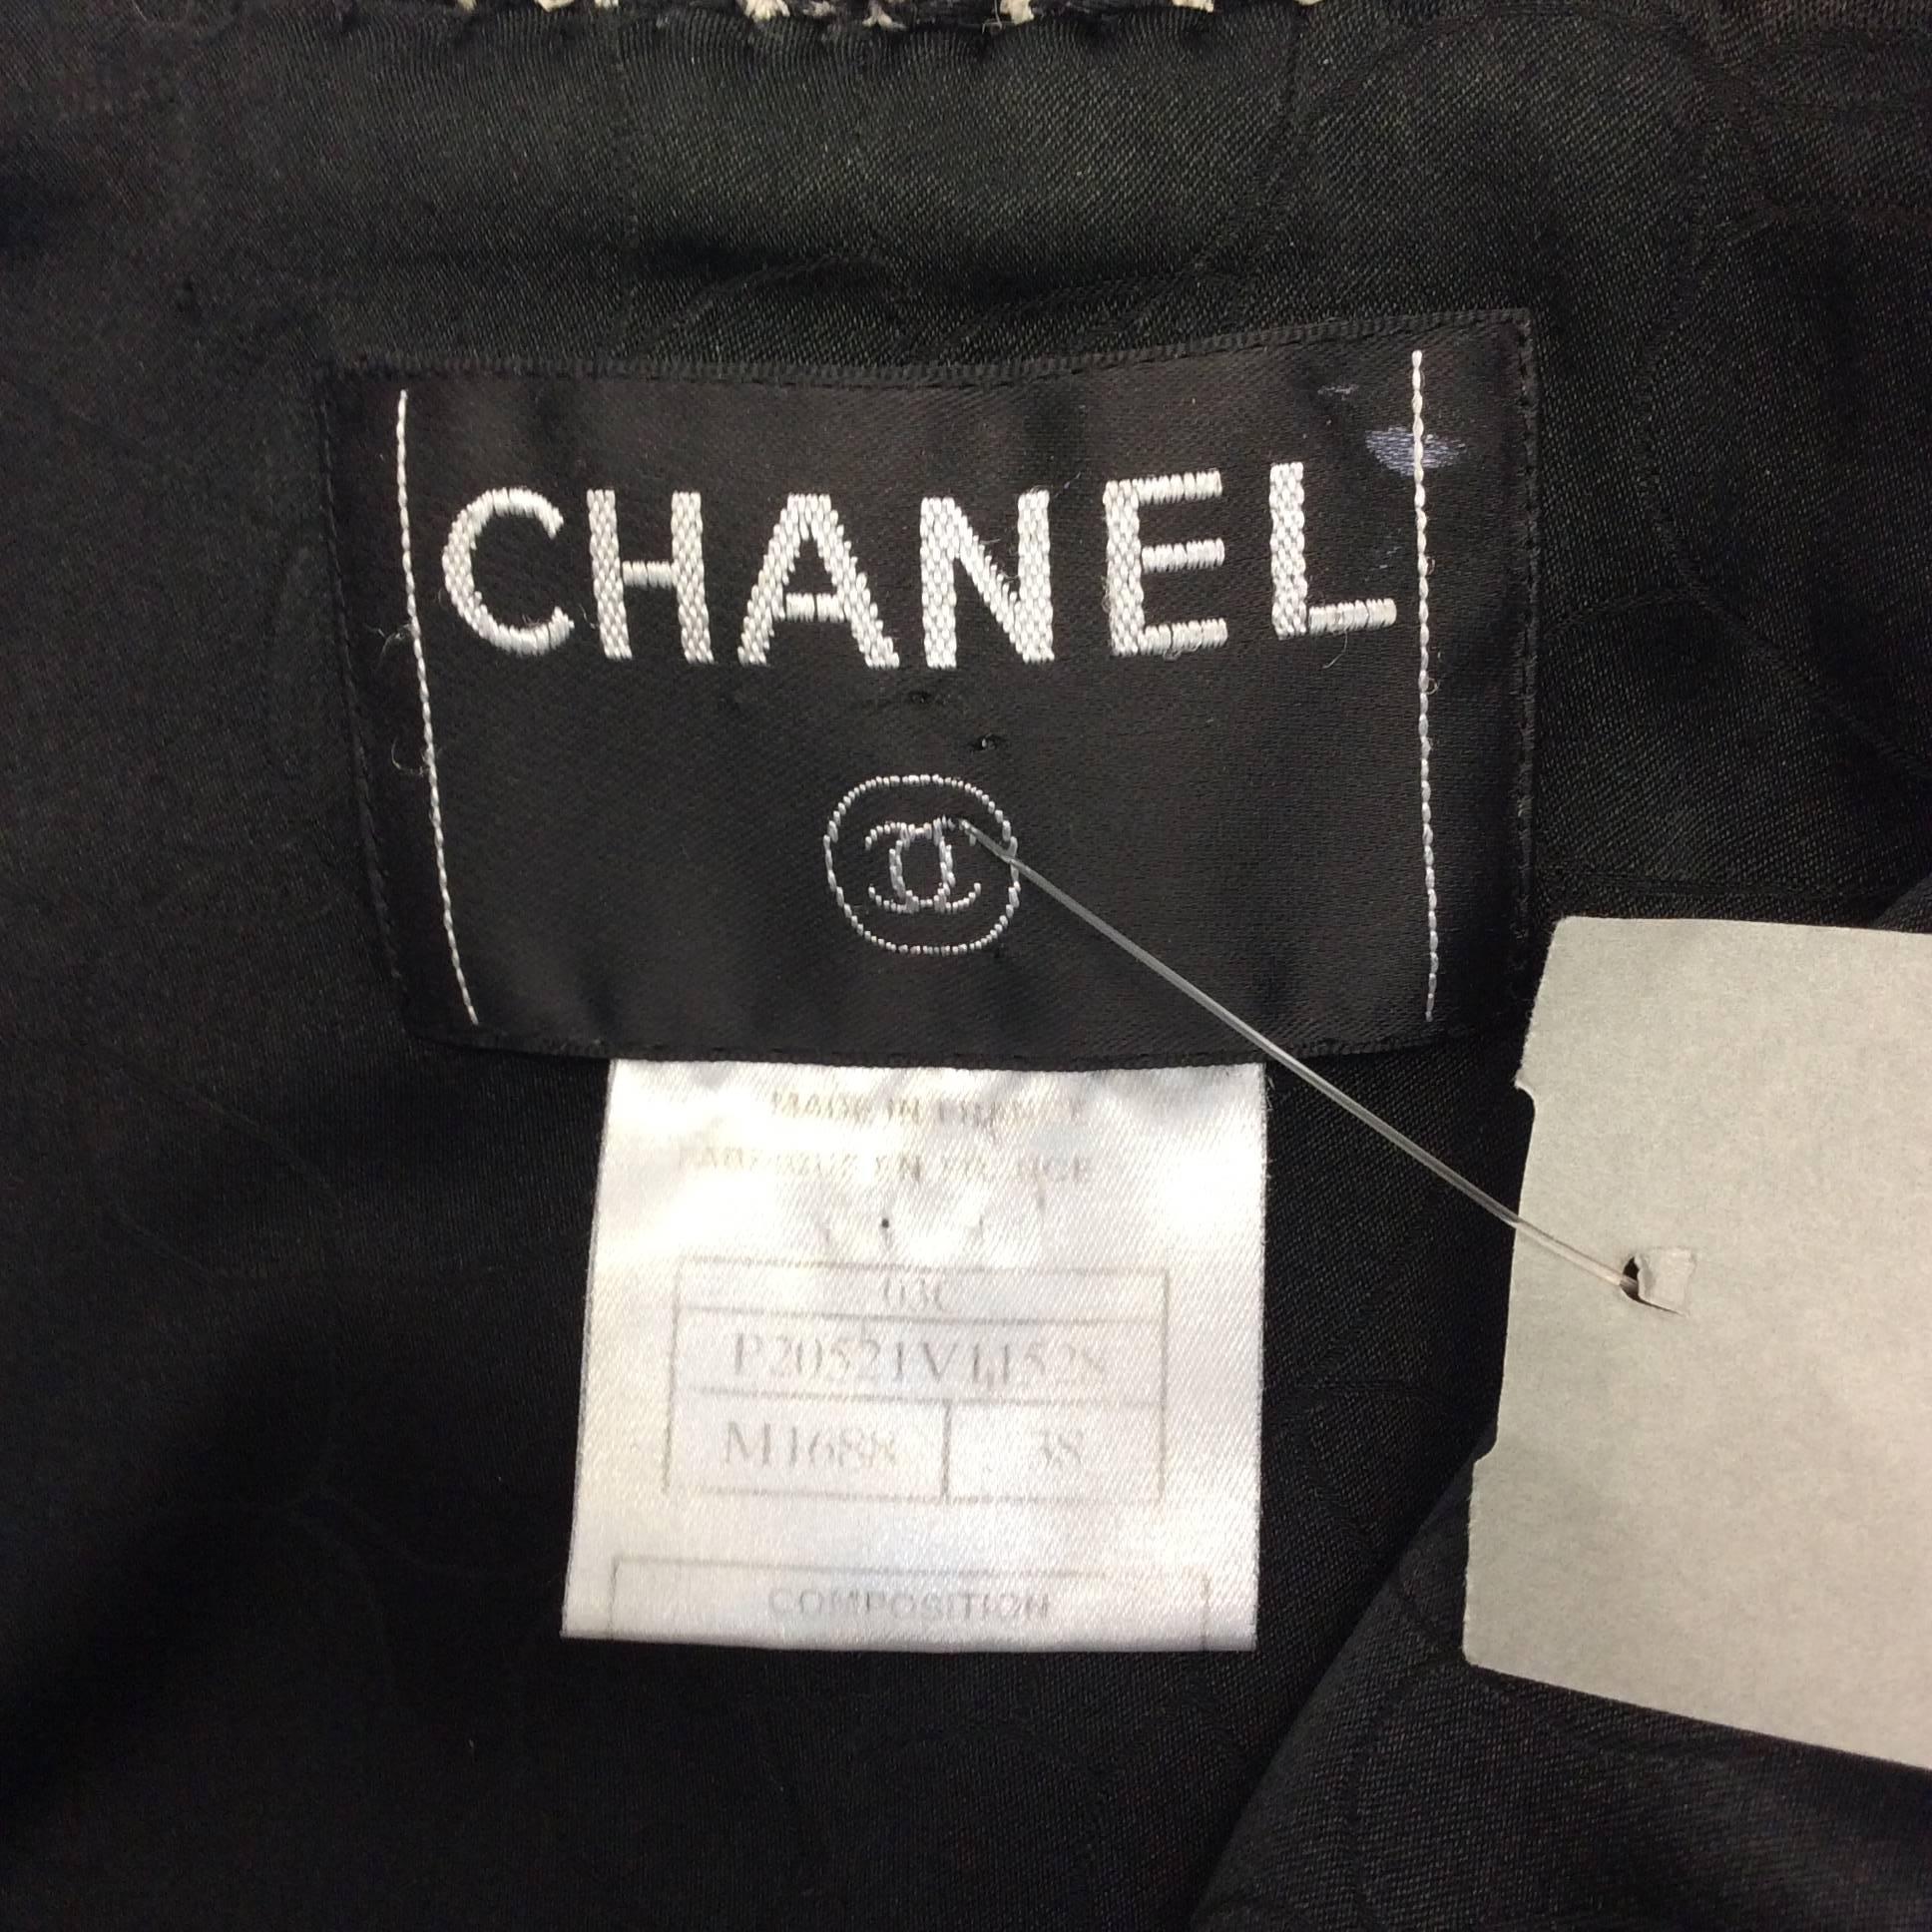 Chanel Black and White Sequined Tweed Jacket with Florettes For Sale 3